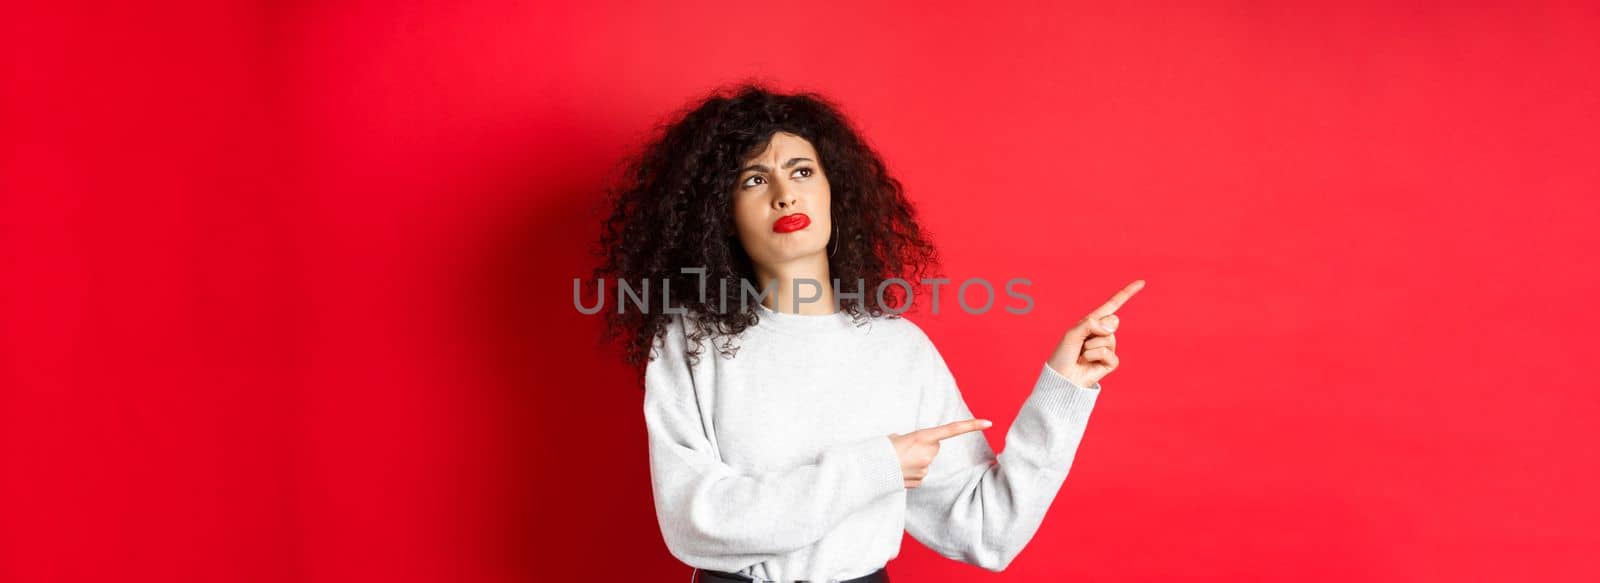 Skeptical frowning girl with curly hair, pointing and looking left hesitant, standing upset on red background.